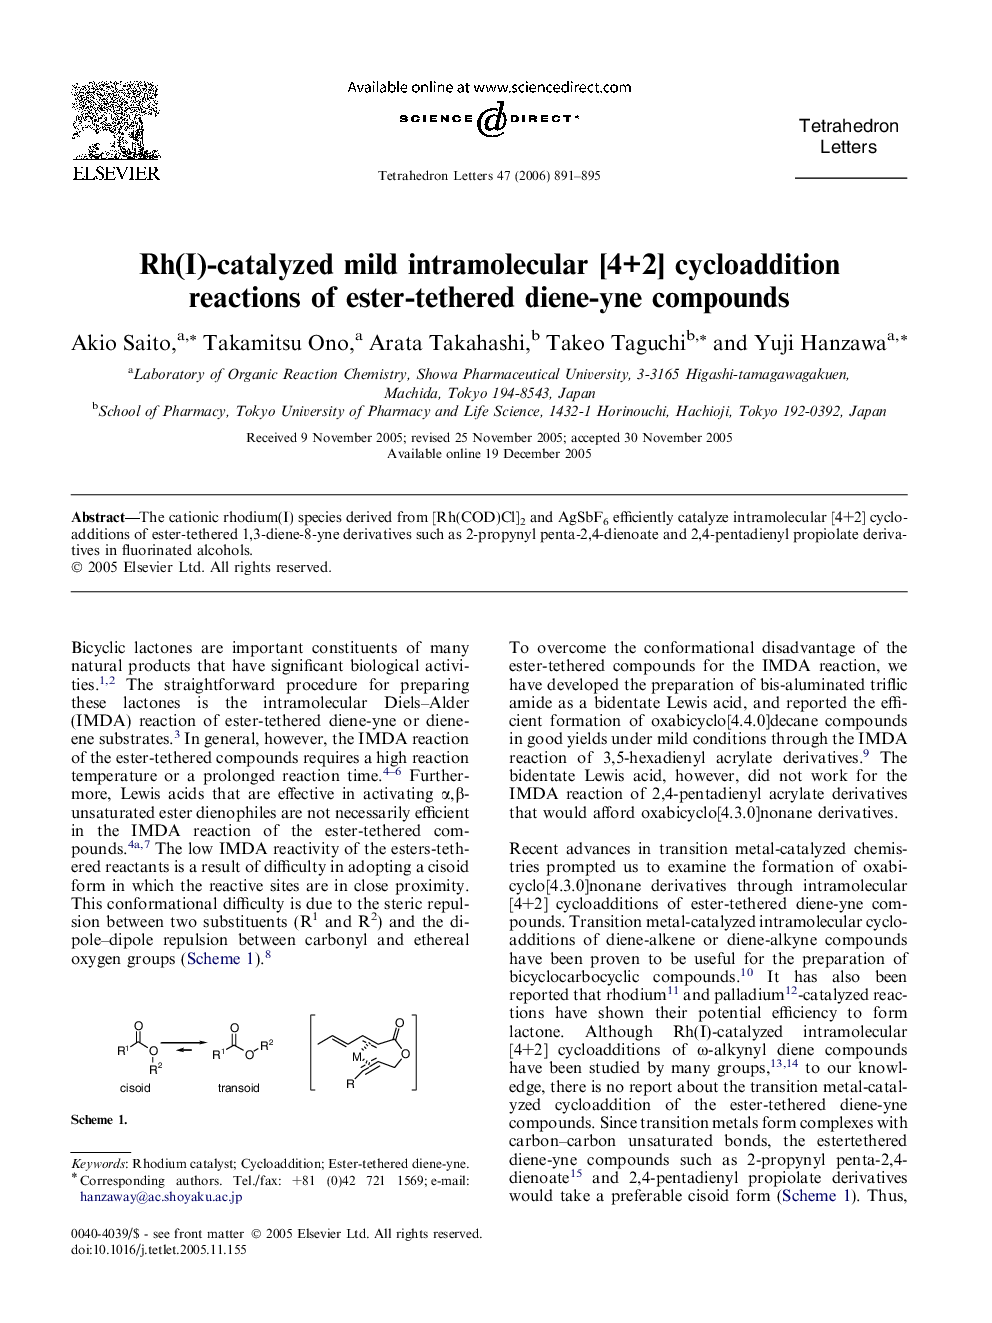 Rh(I)-catalyzed mild intramolecular [4+2] cycloaddition reactions of ester-tethered diene-yne compounds